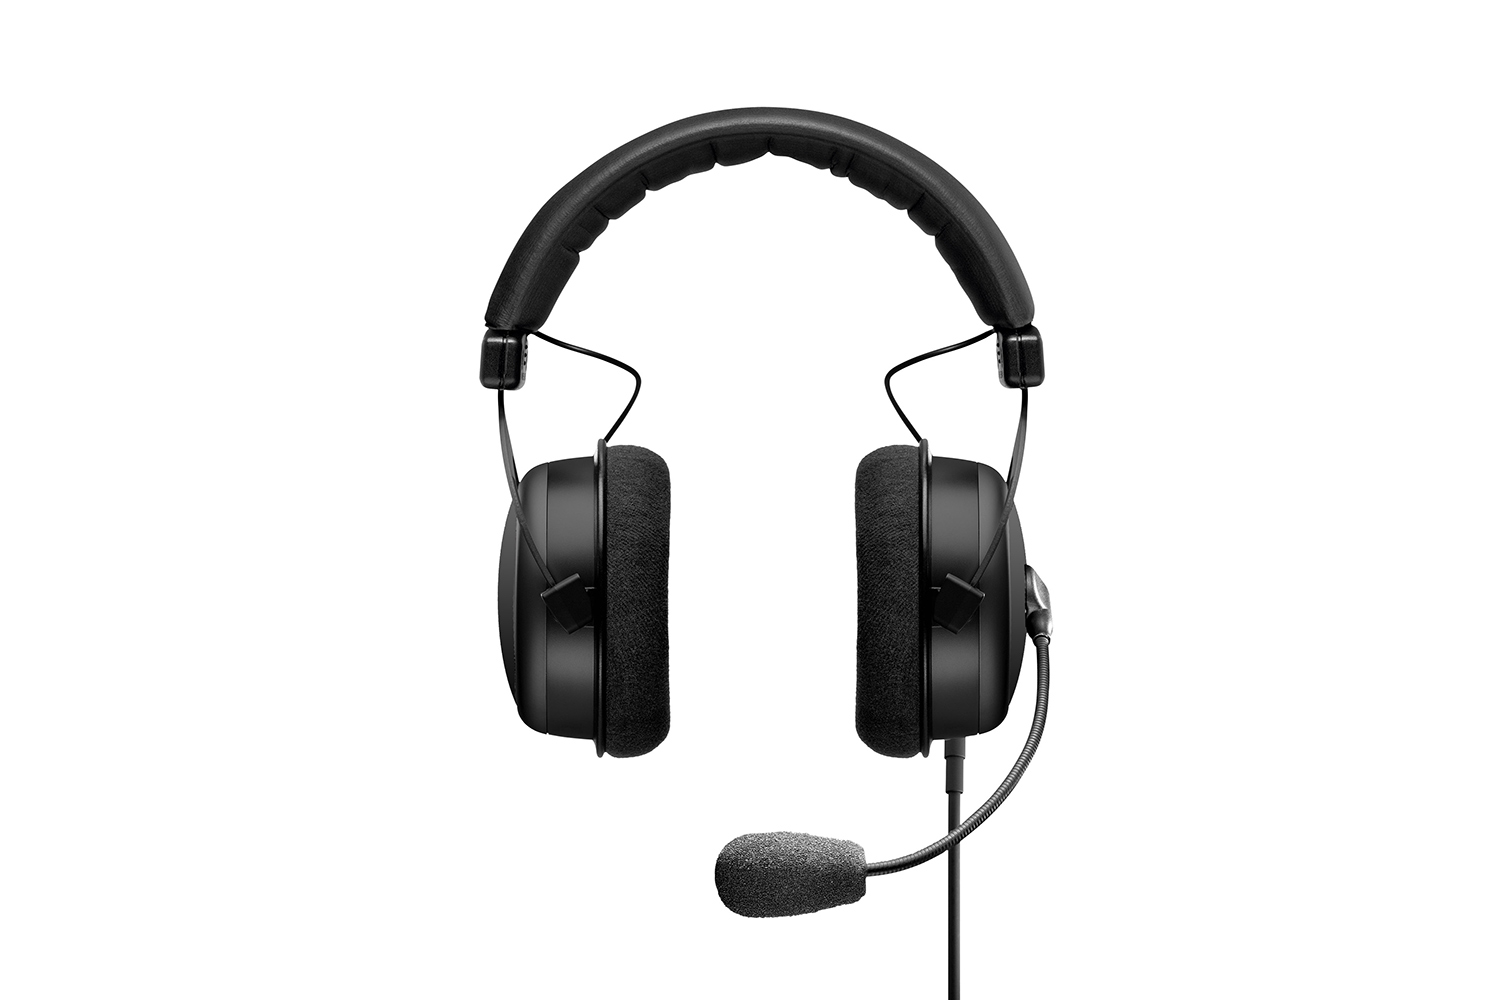 beyerdynamic announces second gen mmx 300 gaming headset ces 2017 pic mmx300 facelift2016 16 11 side v1 01